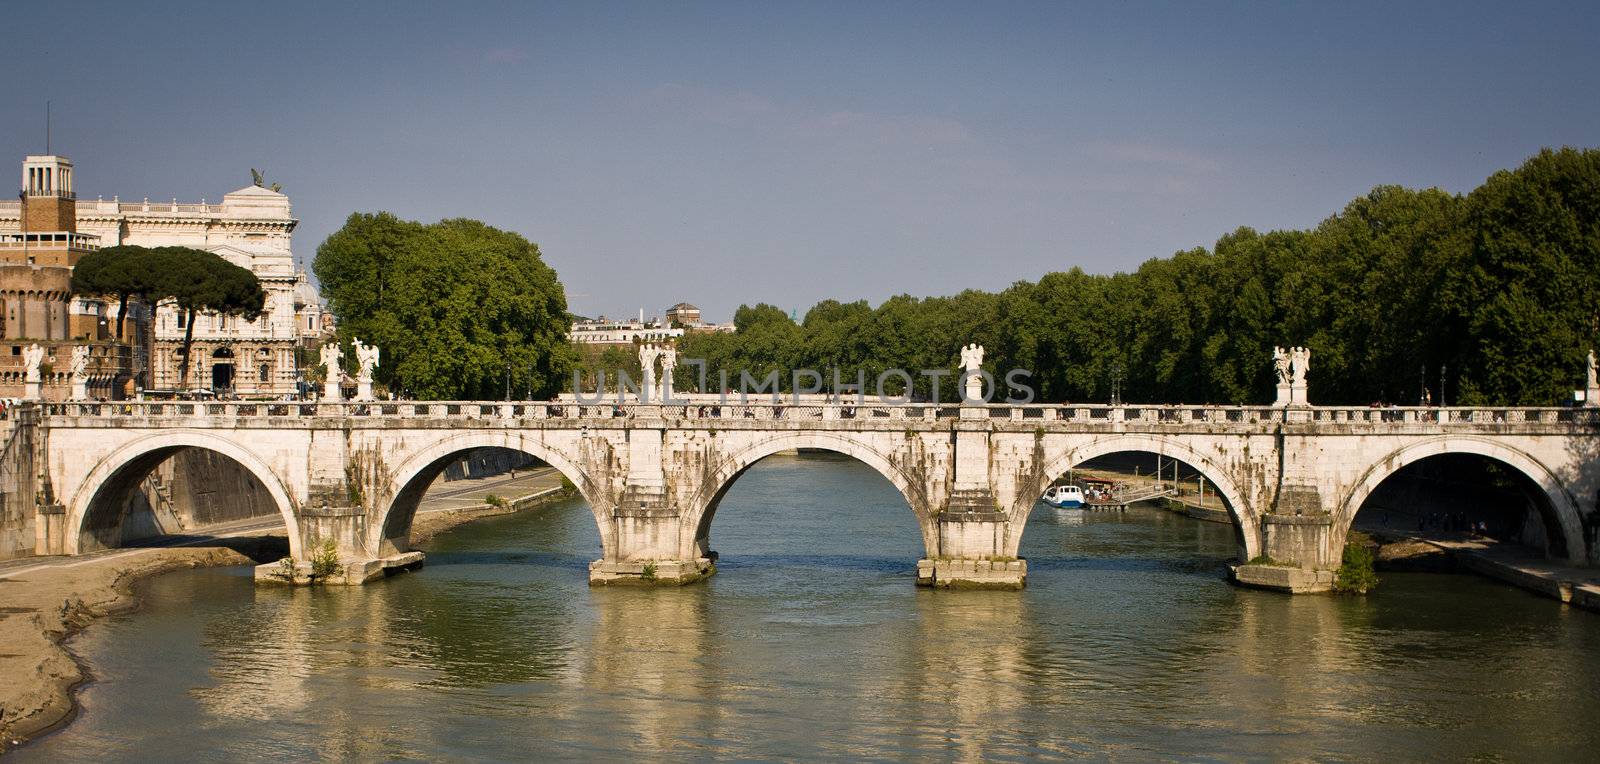 Panoramic side view of the Ponte Sant'Angelo bridge with the river Tiber flowing underneath it - Rome, Italy